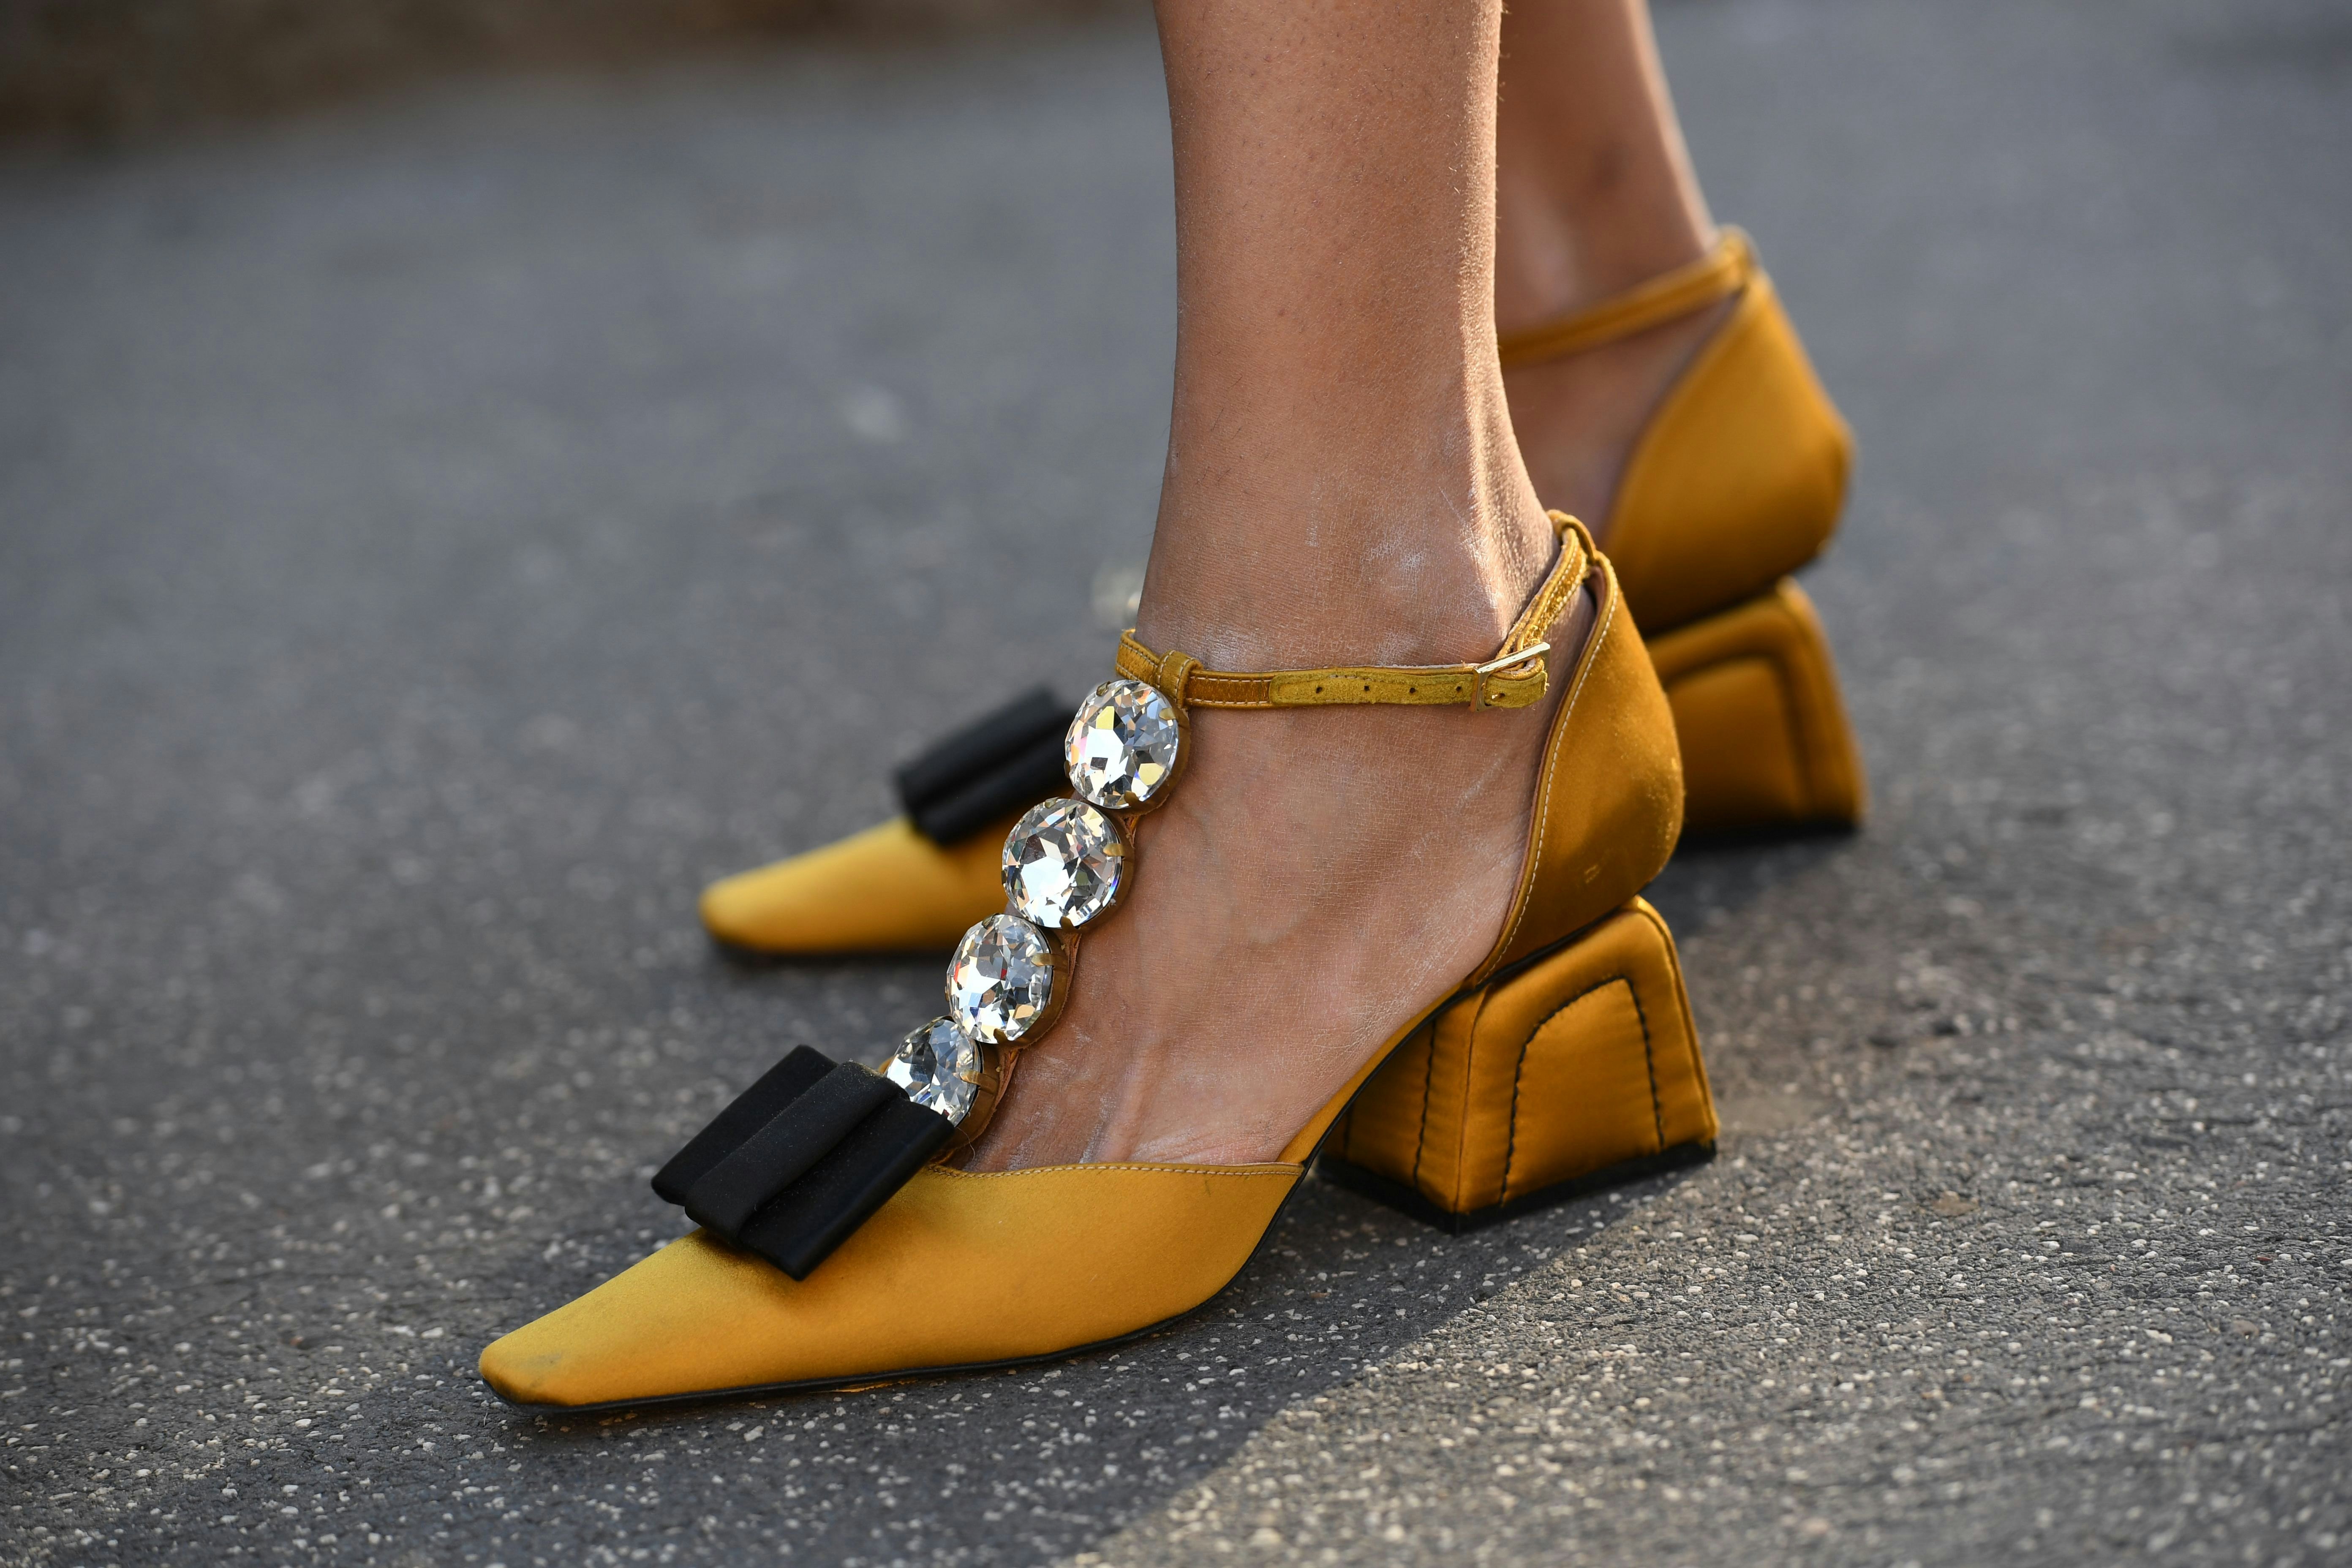 statement high heels shoes